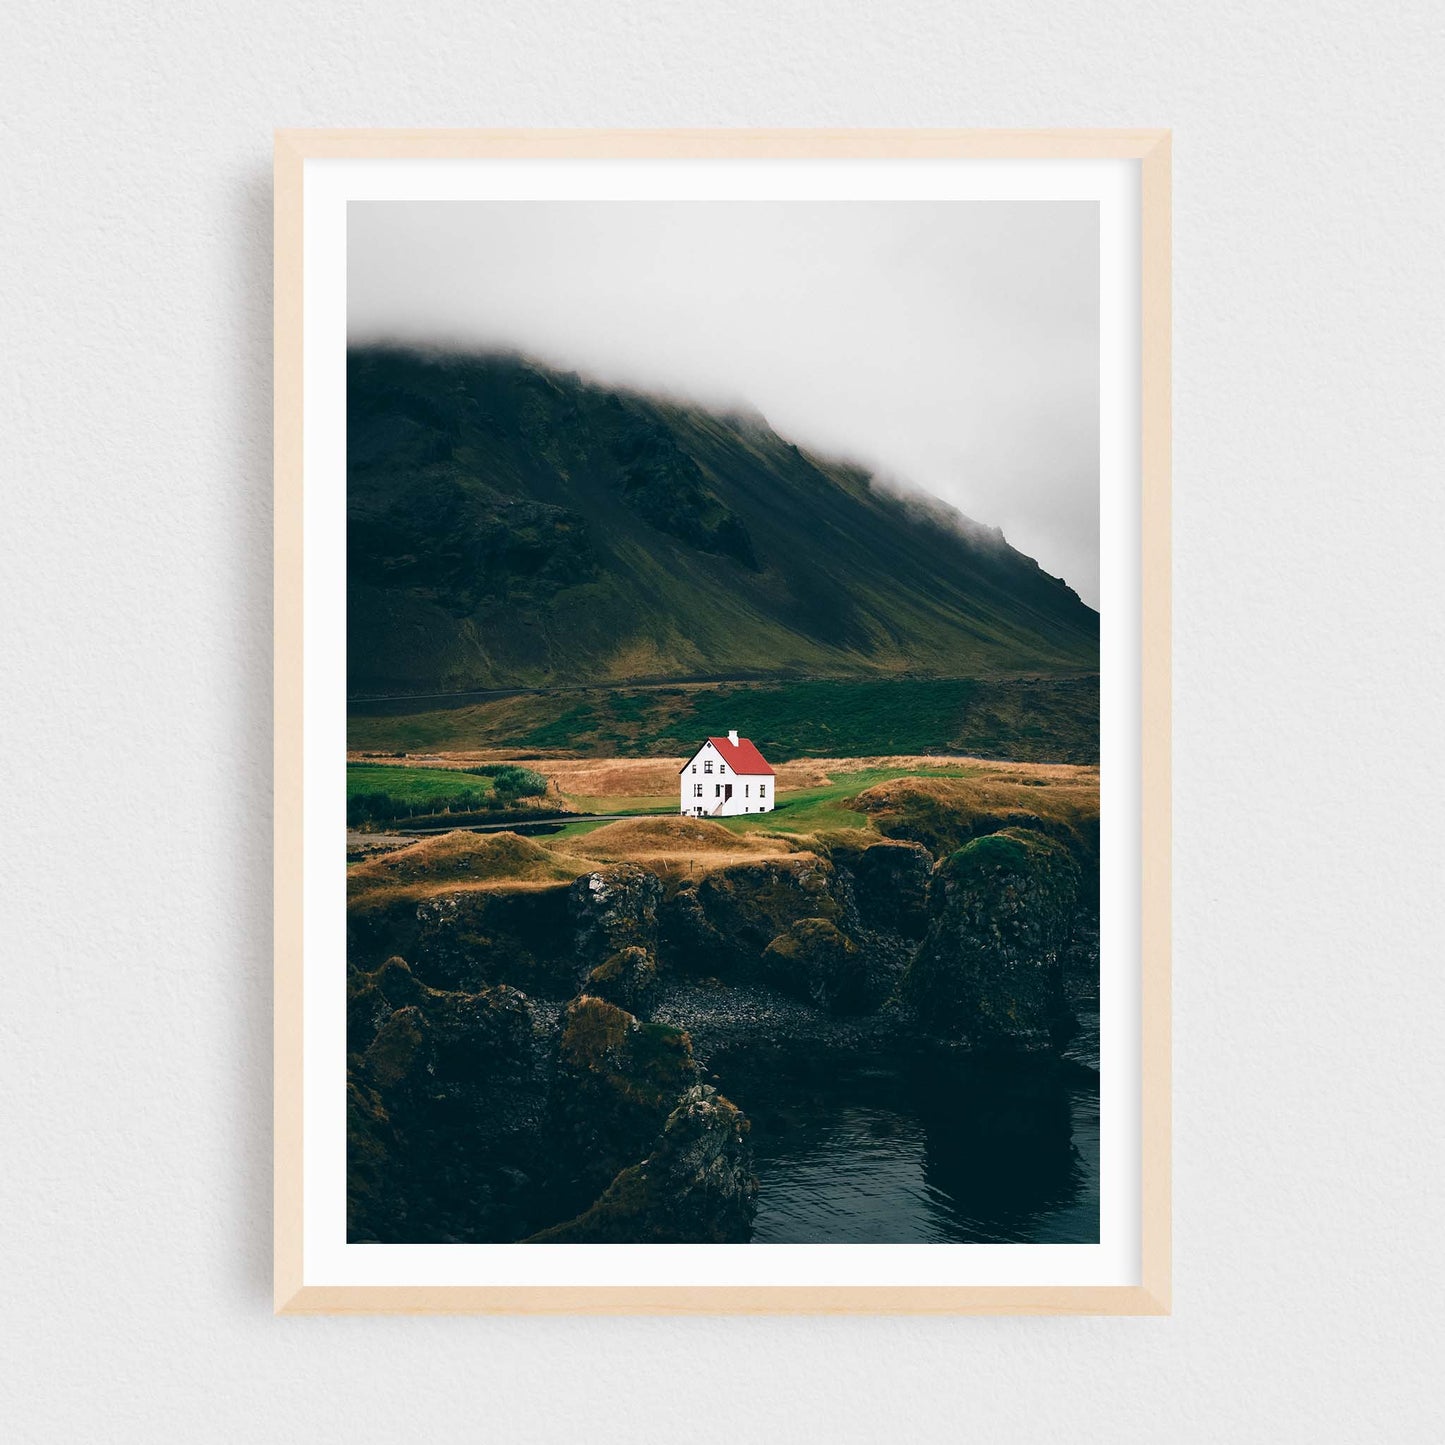 Iceland fine art photography print featuring Arnarstapi lonely house, in a maple frame